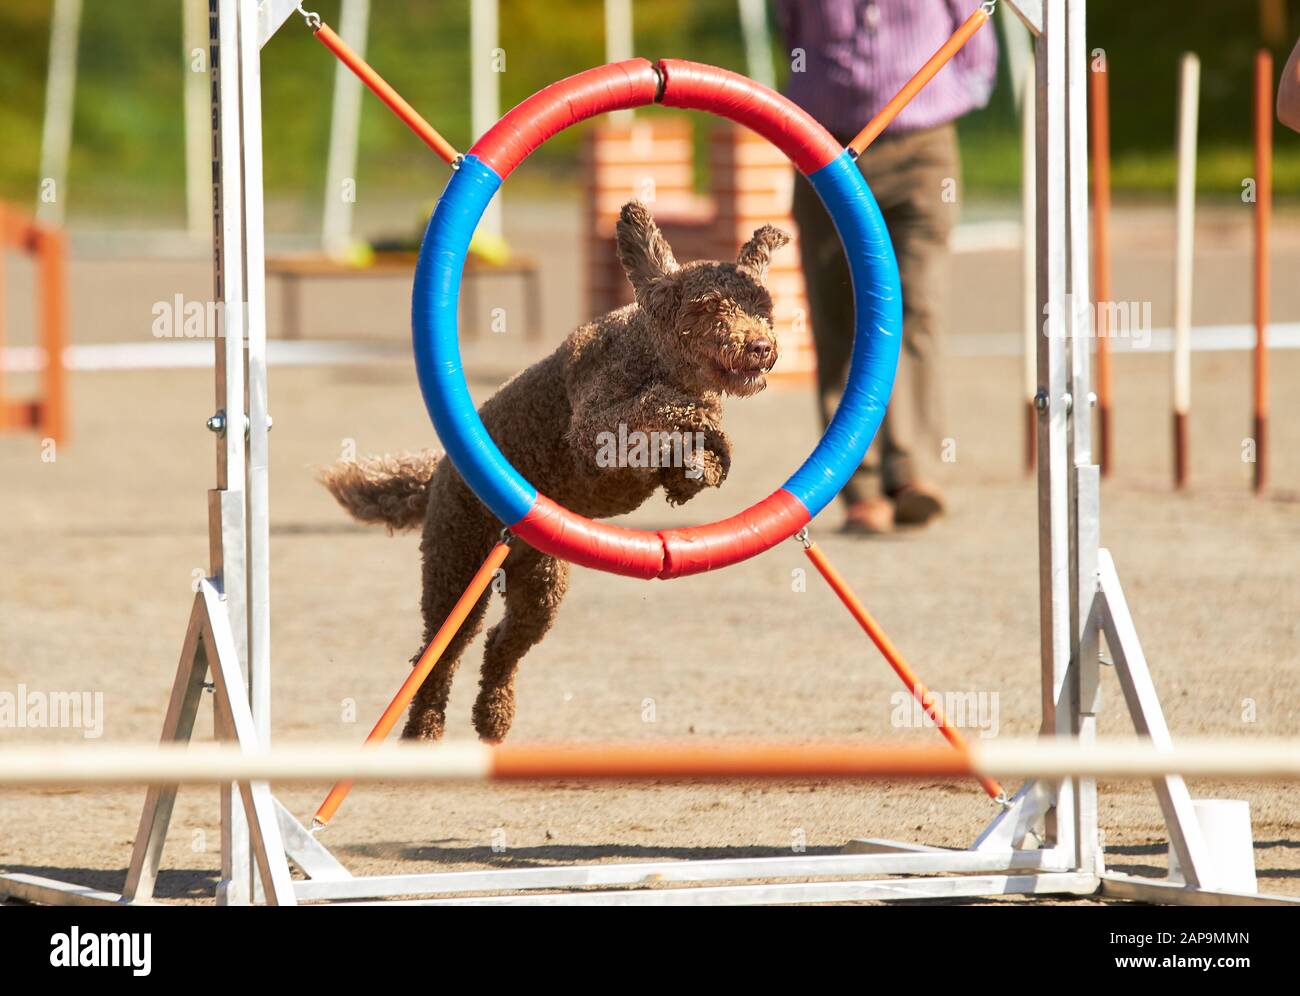 Spanish waterdog jumping through a hurdle at dog agility training. Big fur blowing in wind. Action and sports in concept. Stock Photo